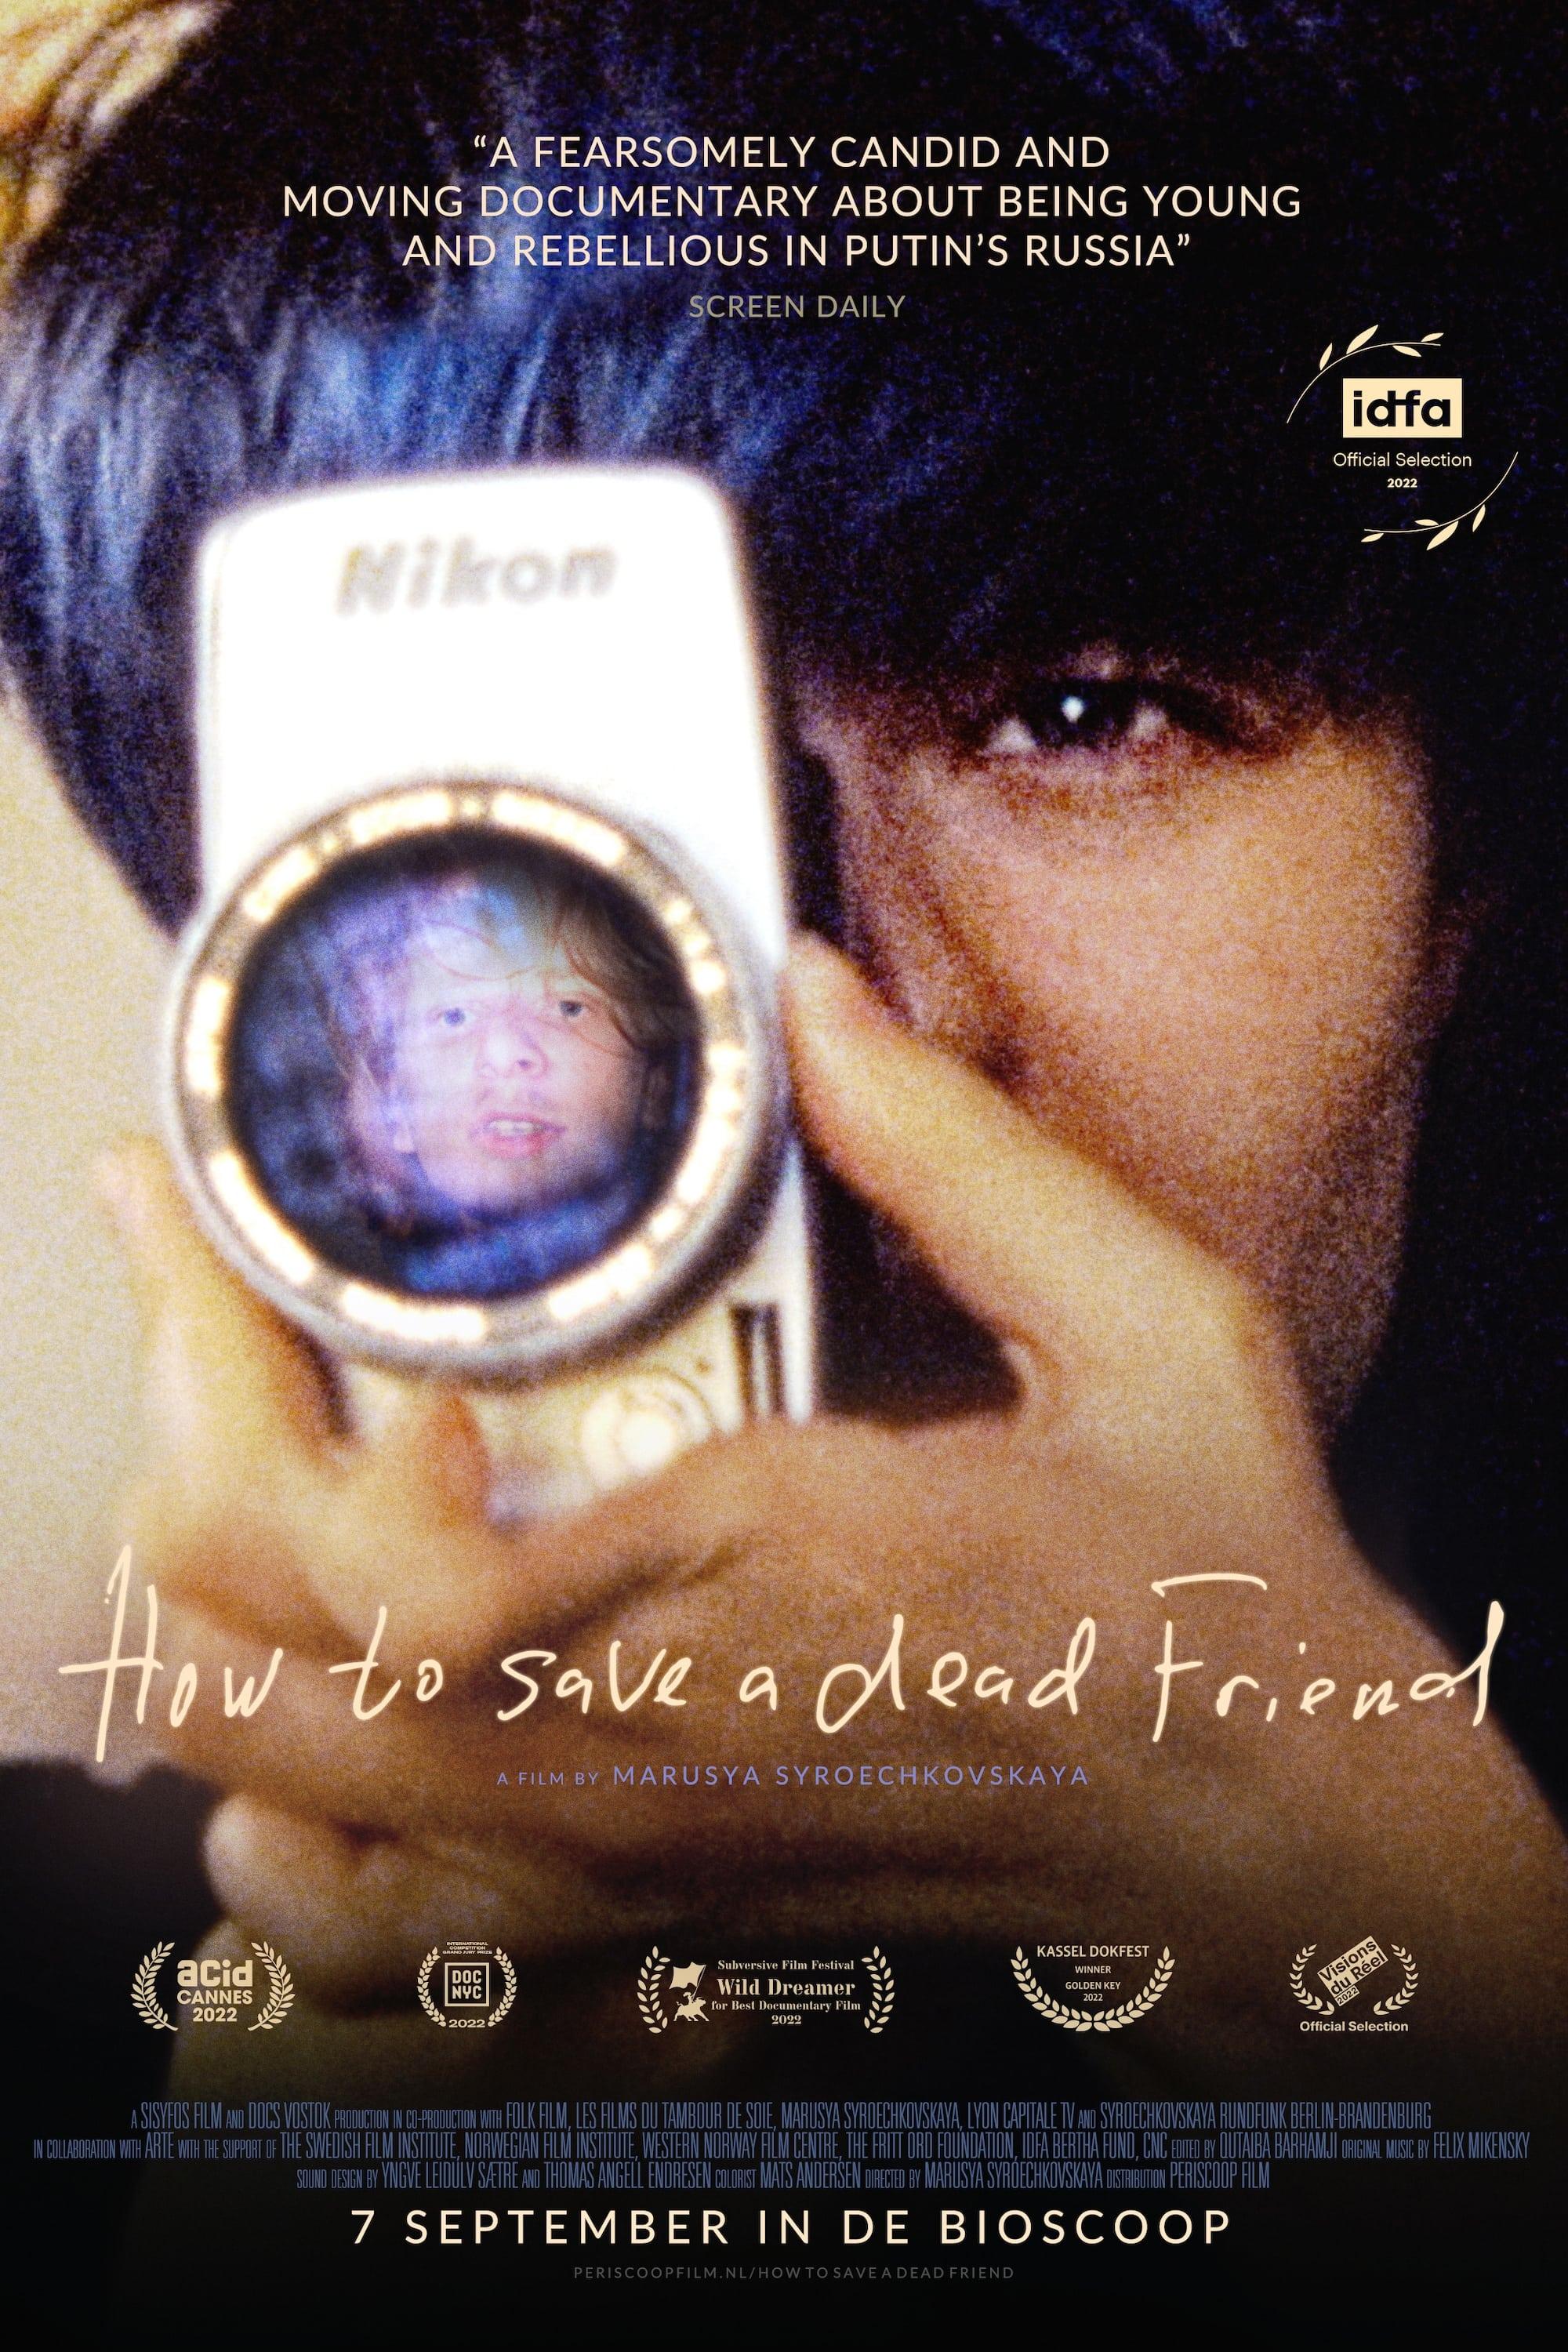 How to Save a Dead Friend poster